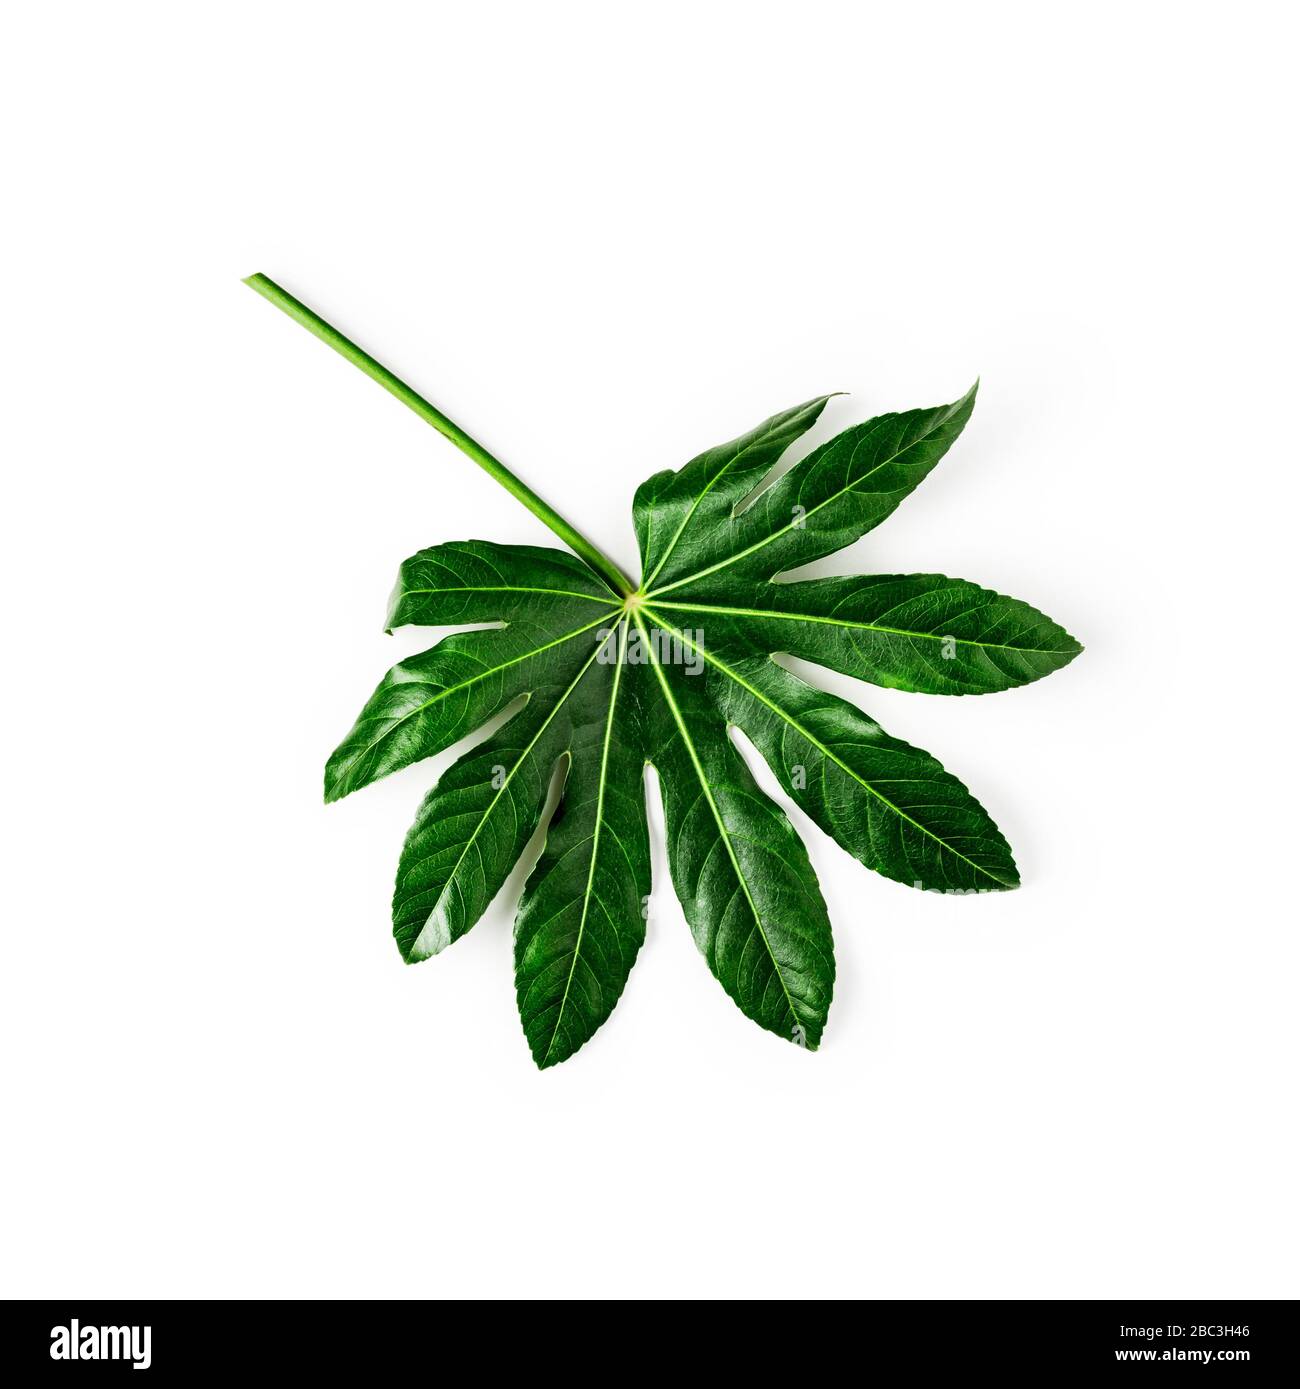 Green aralia leaf, tropical jungle plant fatsia japonica isolated on white background clipping path included. Top view, flat lay, design element Stock Photo